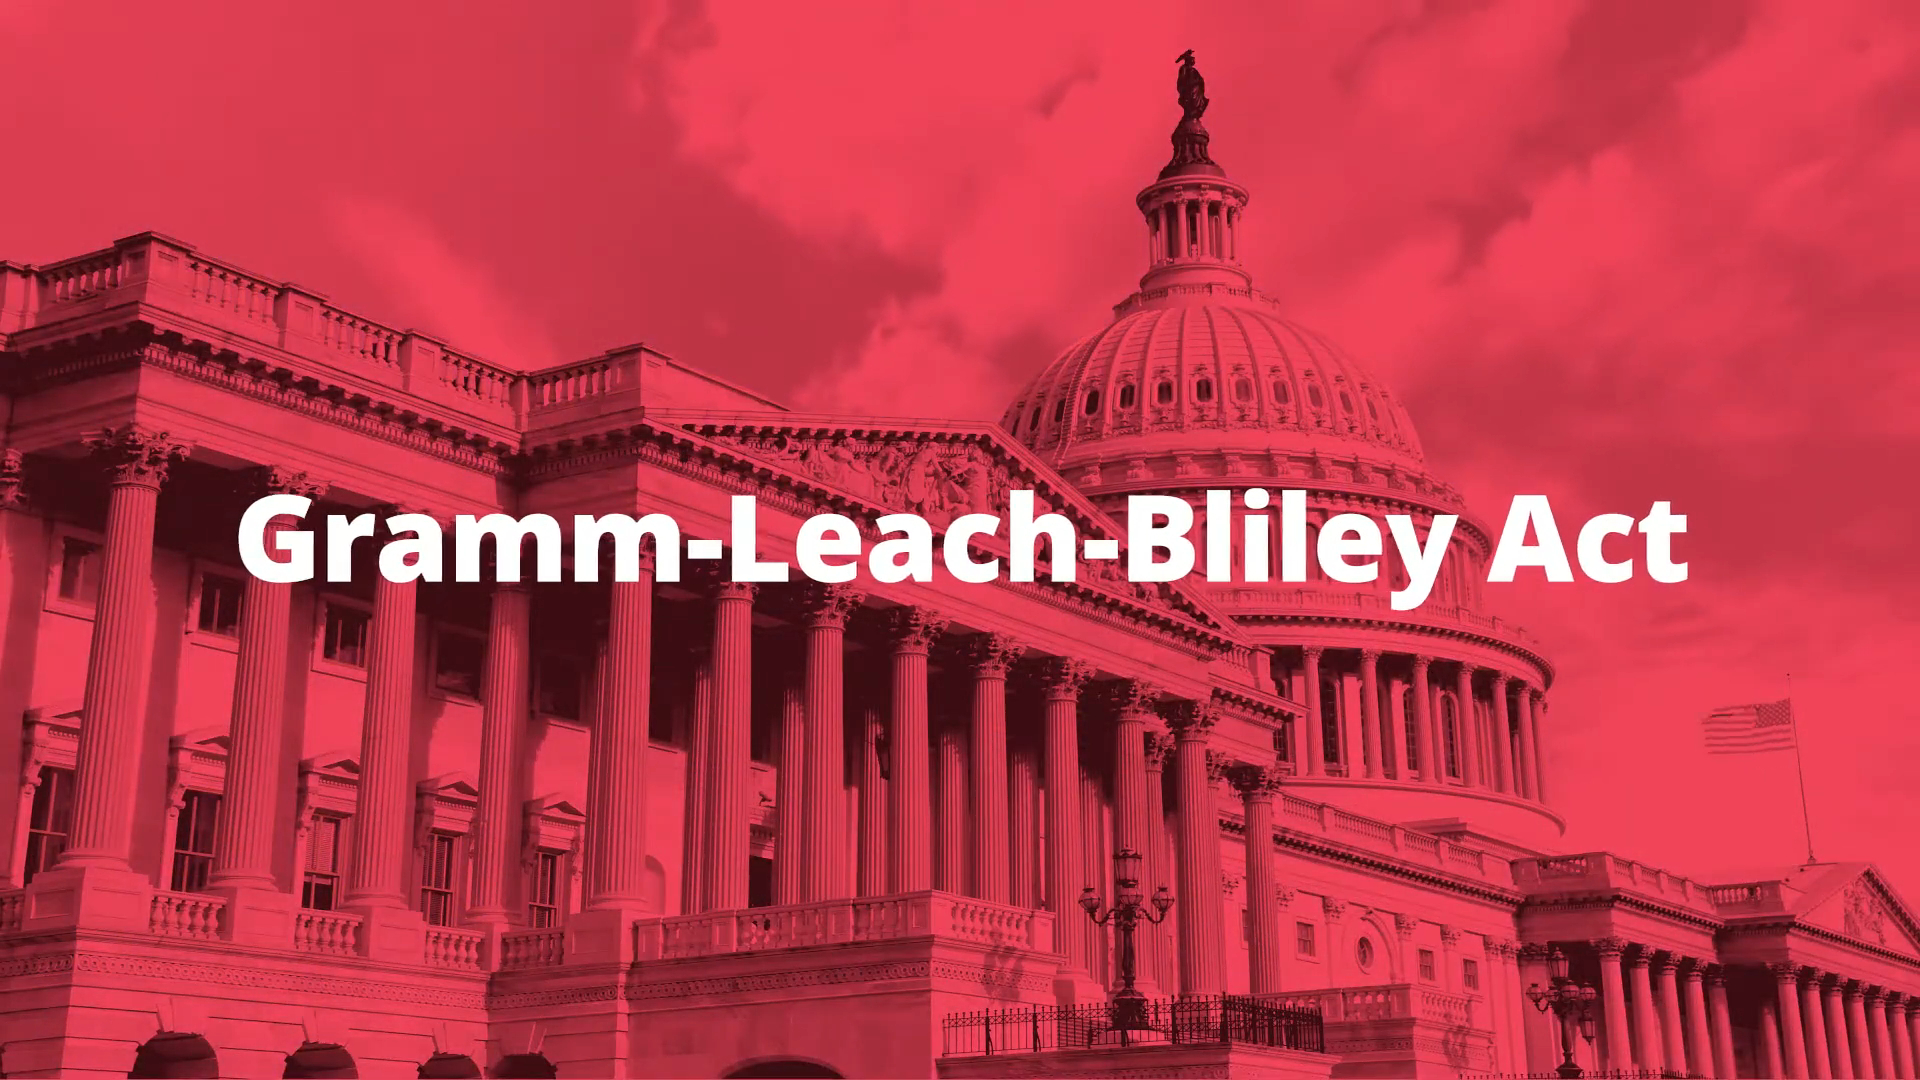 Gramm-Leach-Bliley Act (GLBA) - Data Compliances for Financial Services 